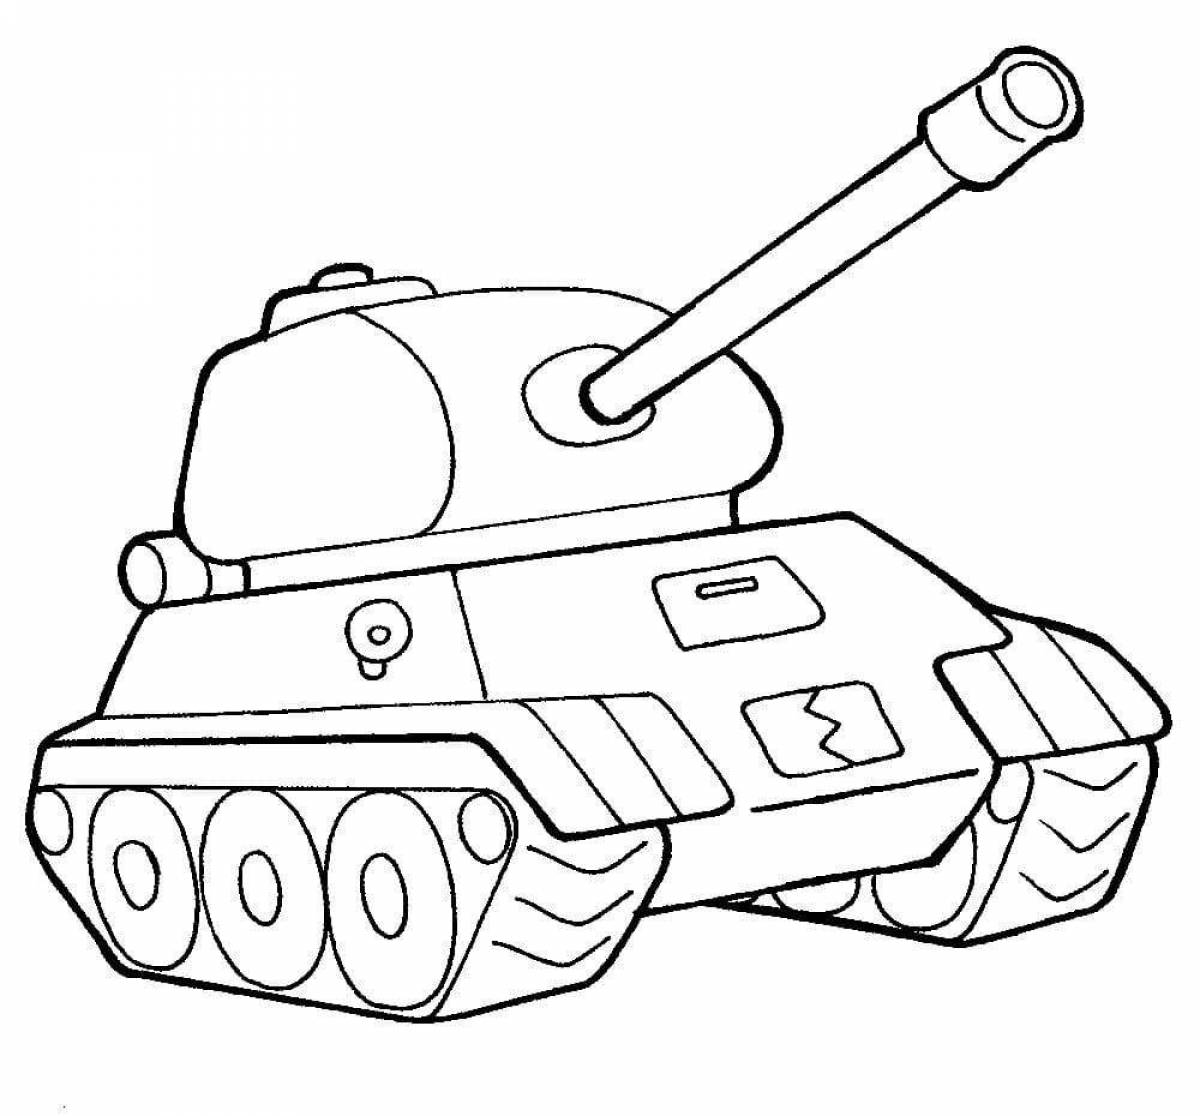 Colorful coloring tank for children 3-4 years old